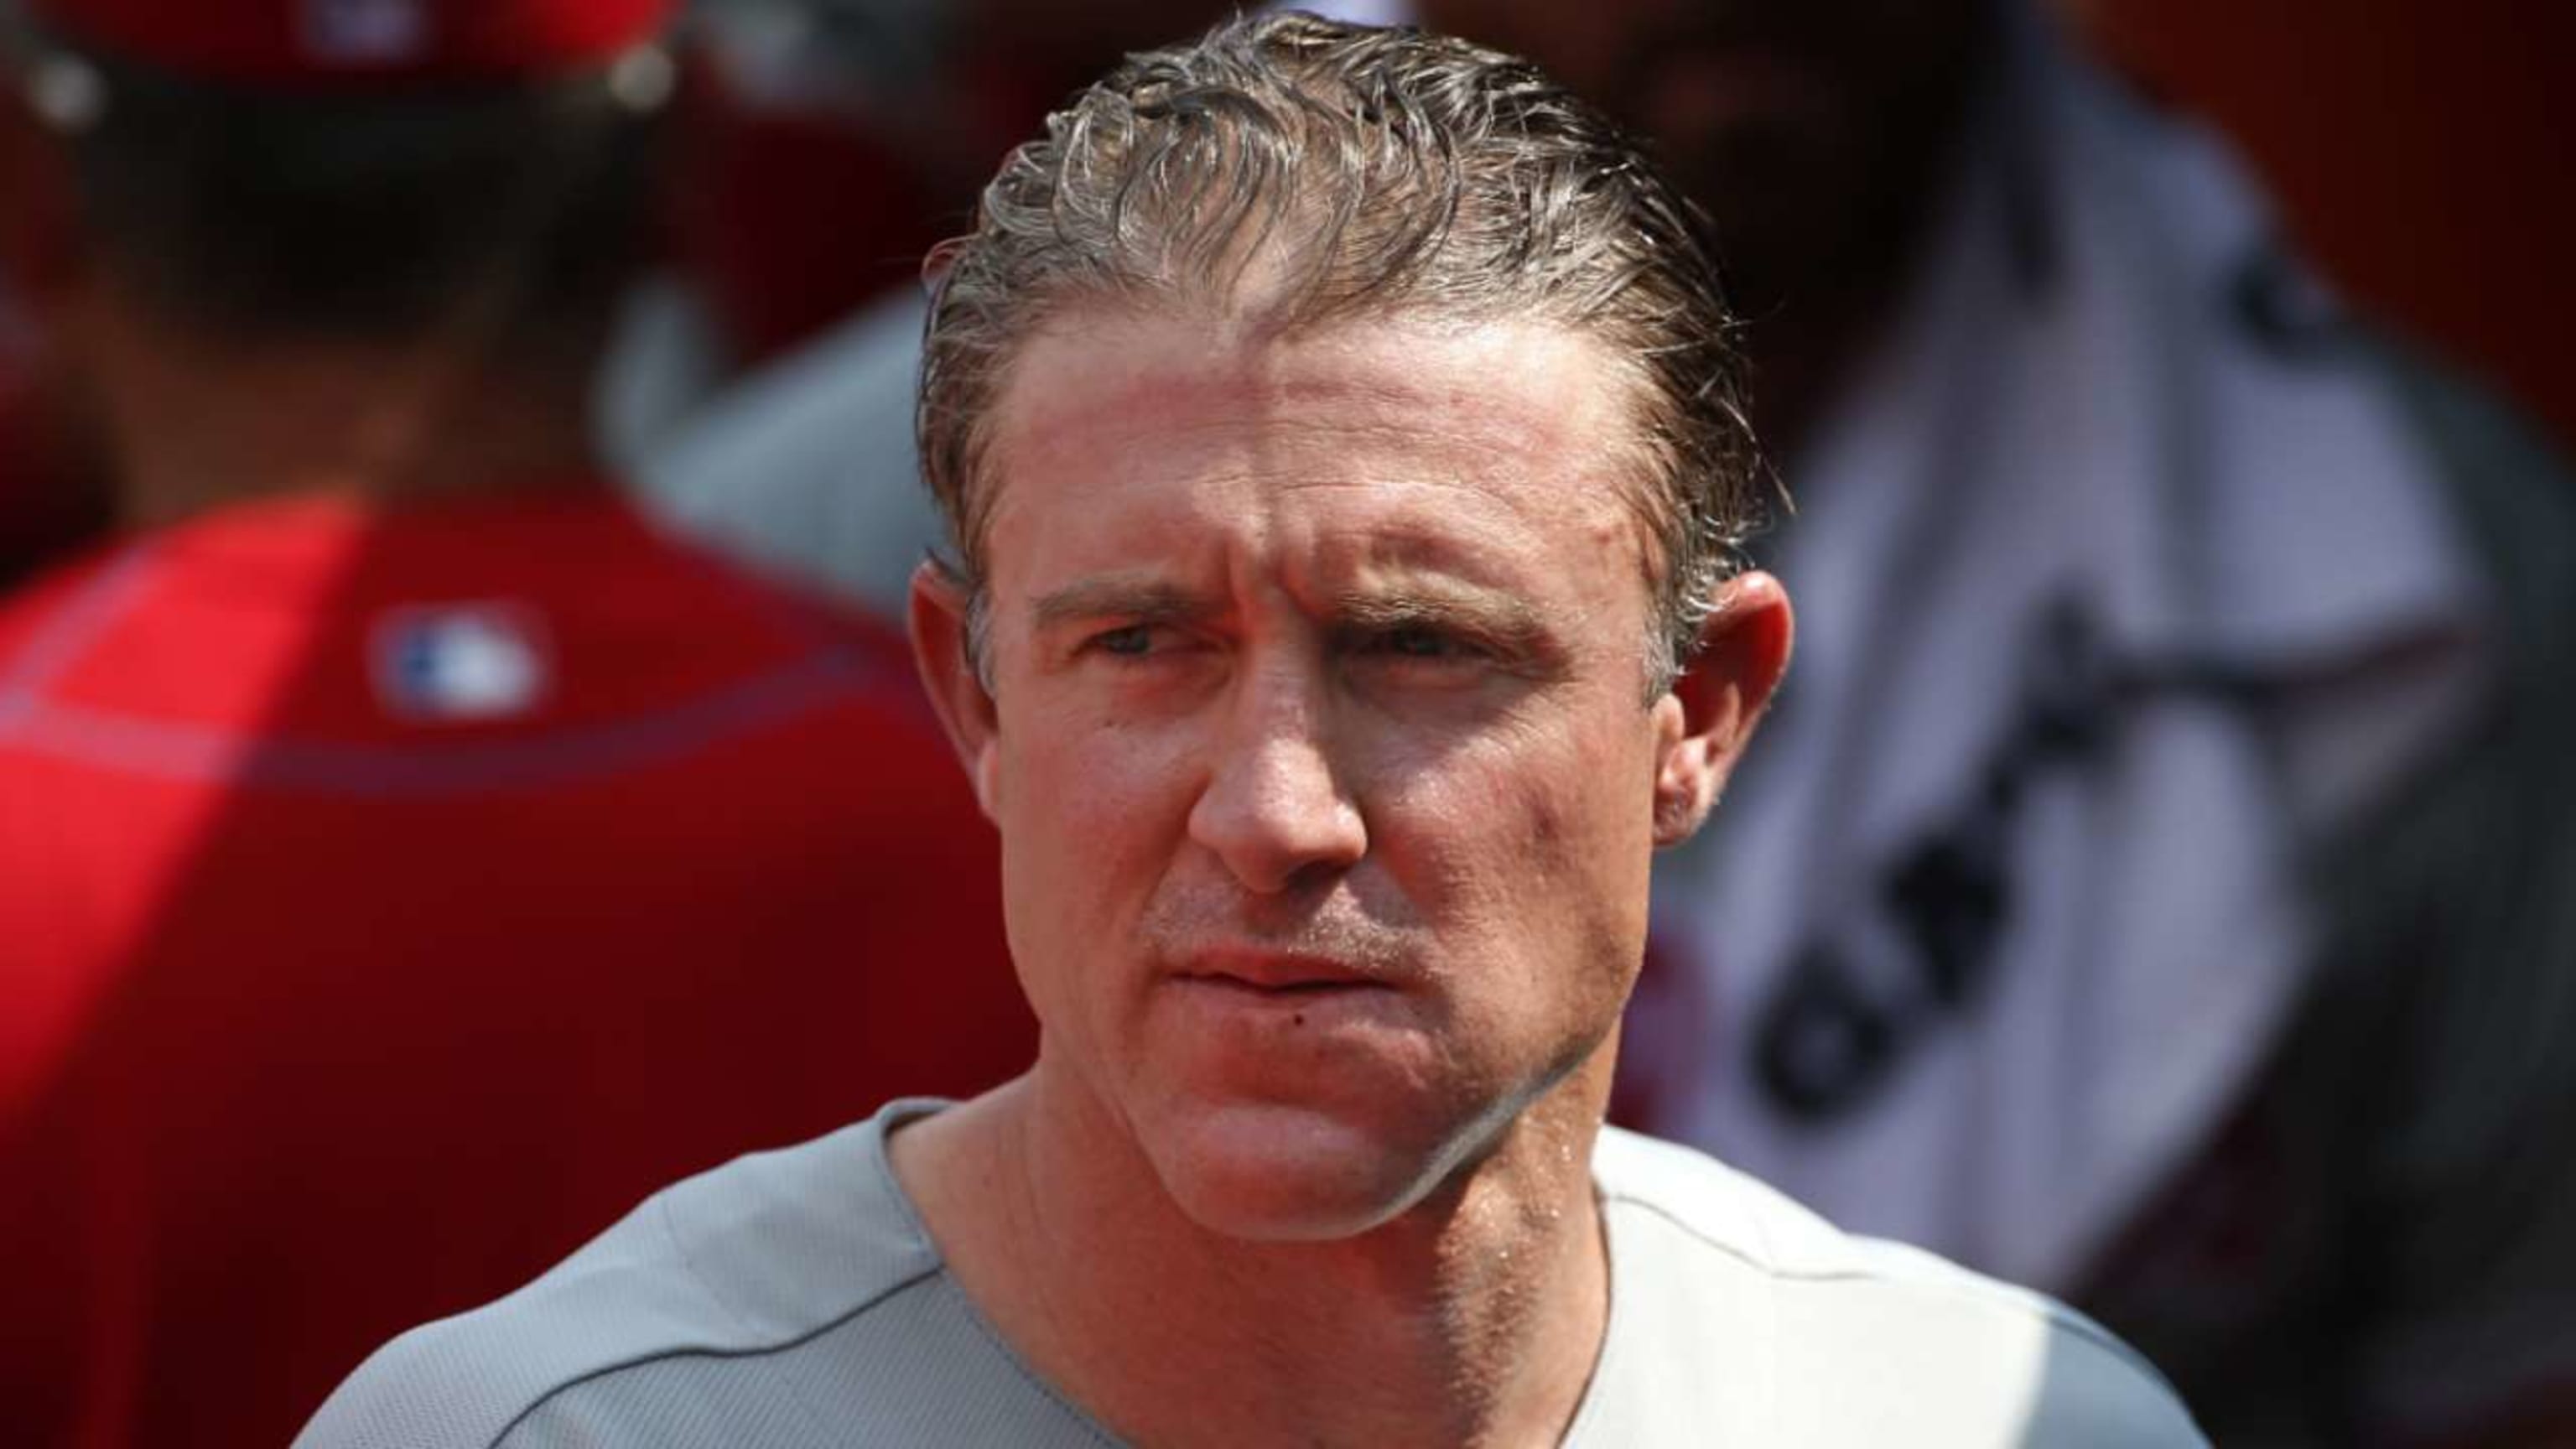 REPORTS: Phillies trade SB Chase Utley to the Dodgers